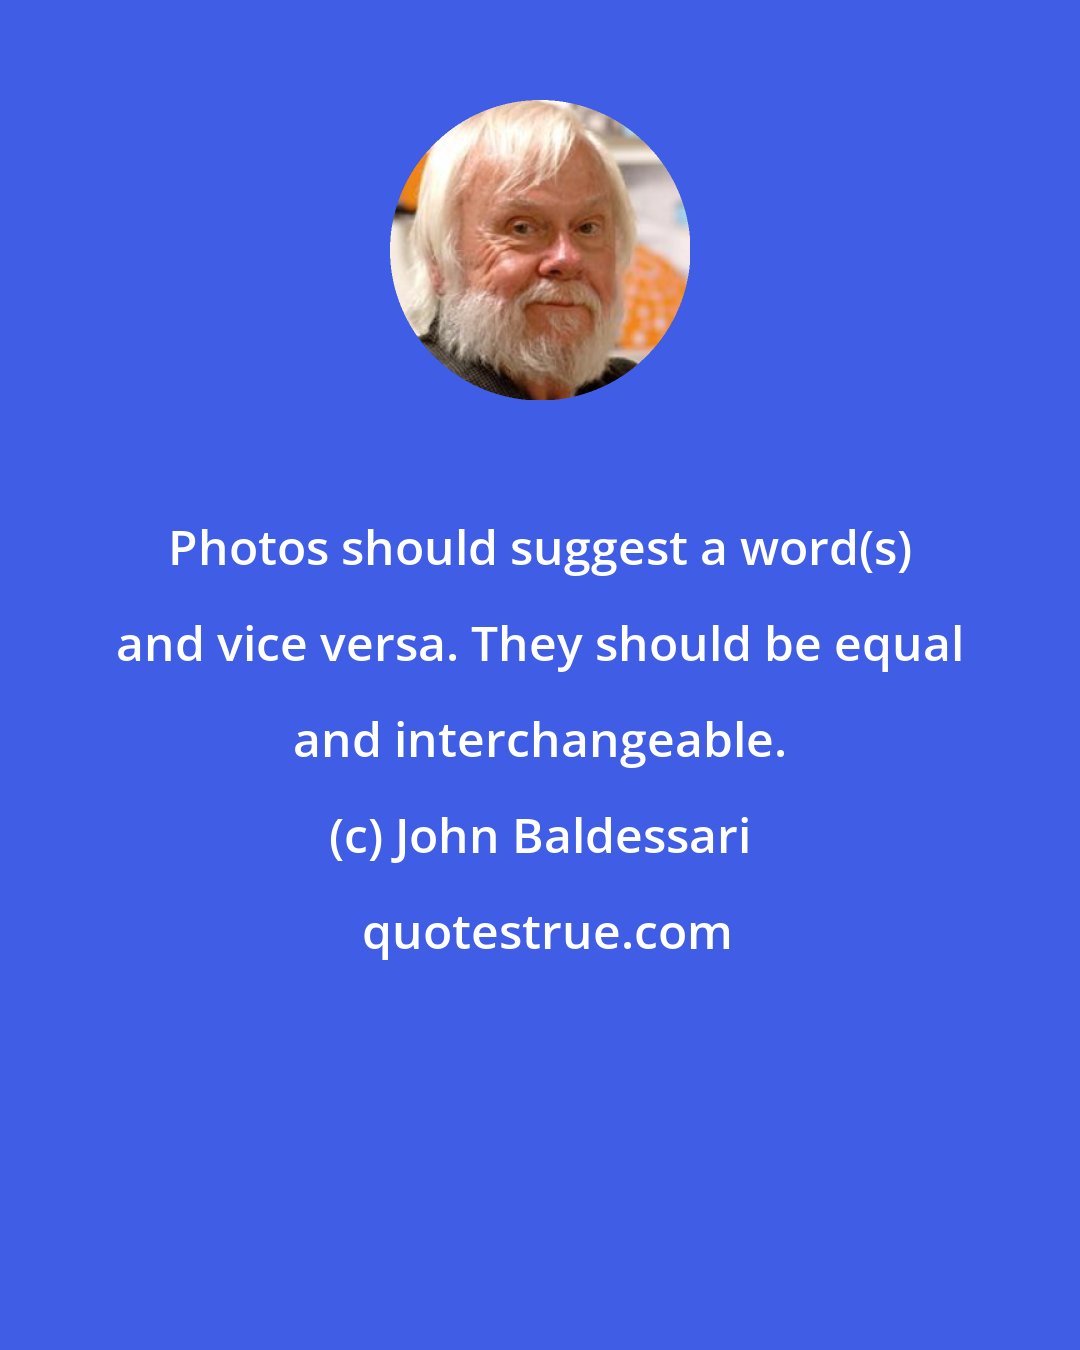 John Baldessari: Photos should suggest a word(s) and vice versa. They should be equal and interchangeable.